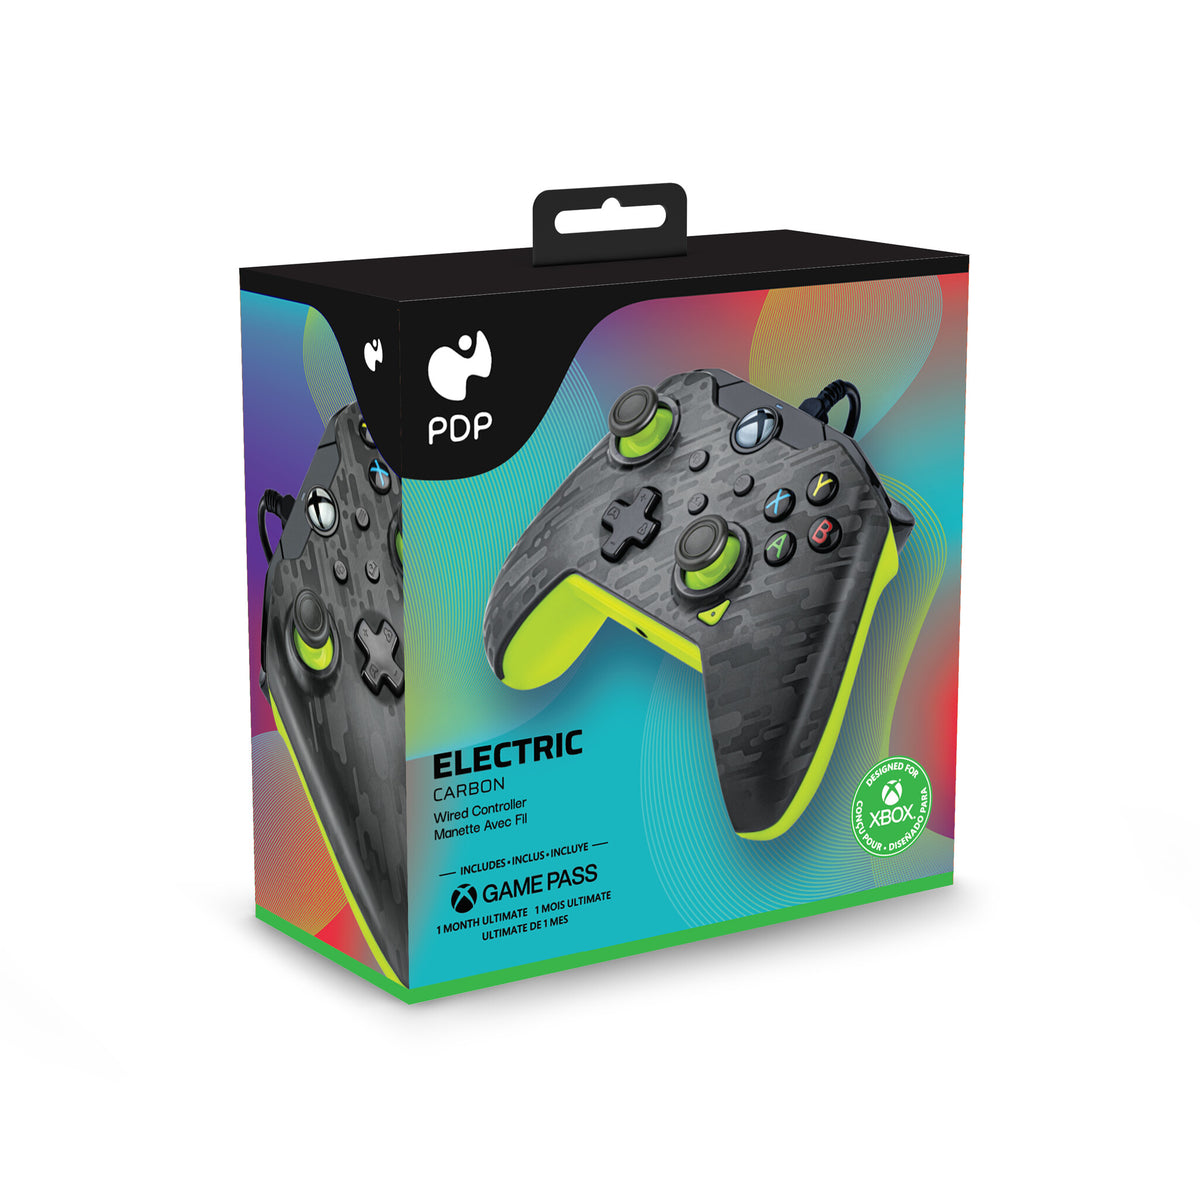 PDP - Wired Controller for PC / Xbox Series X|S in Electric Carbon